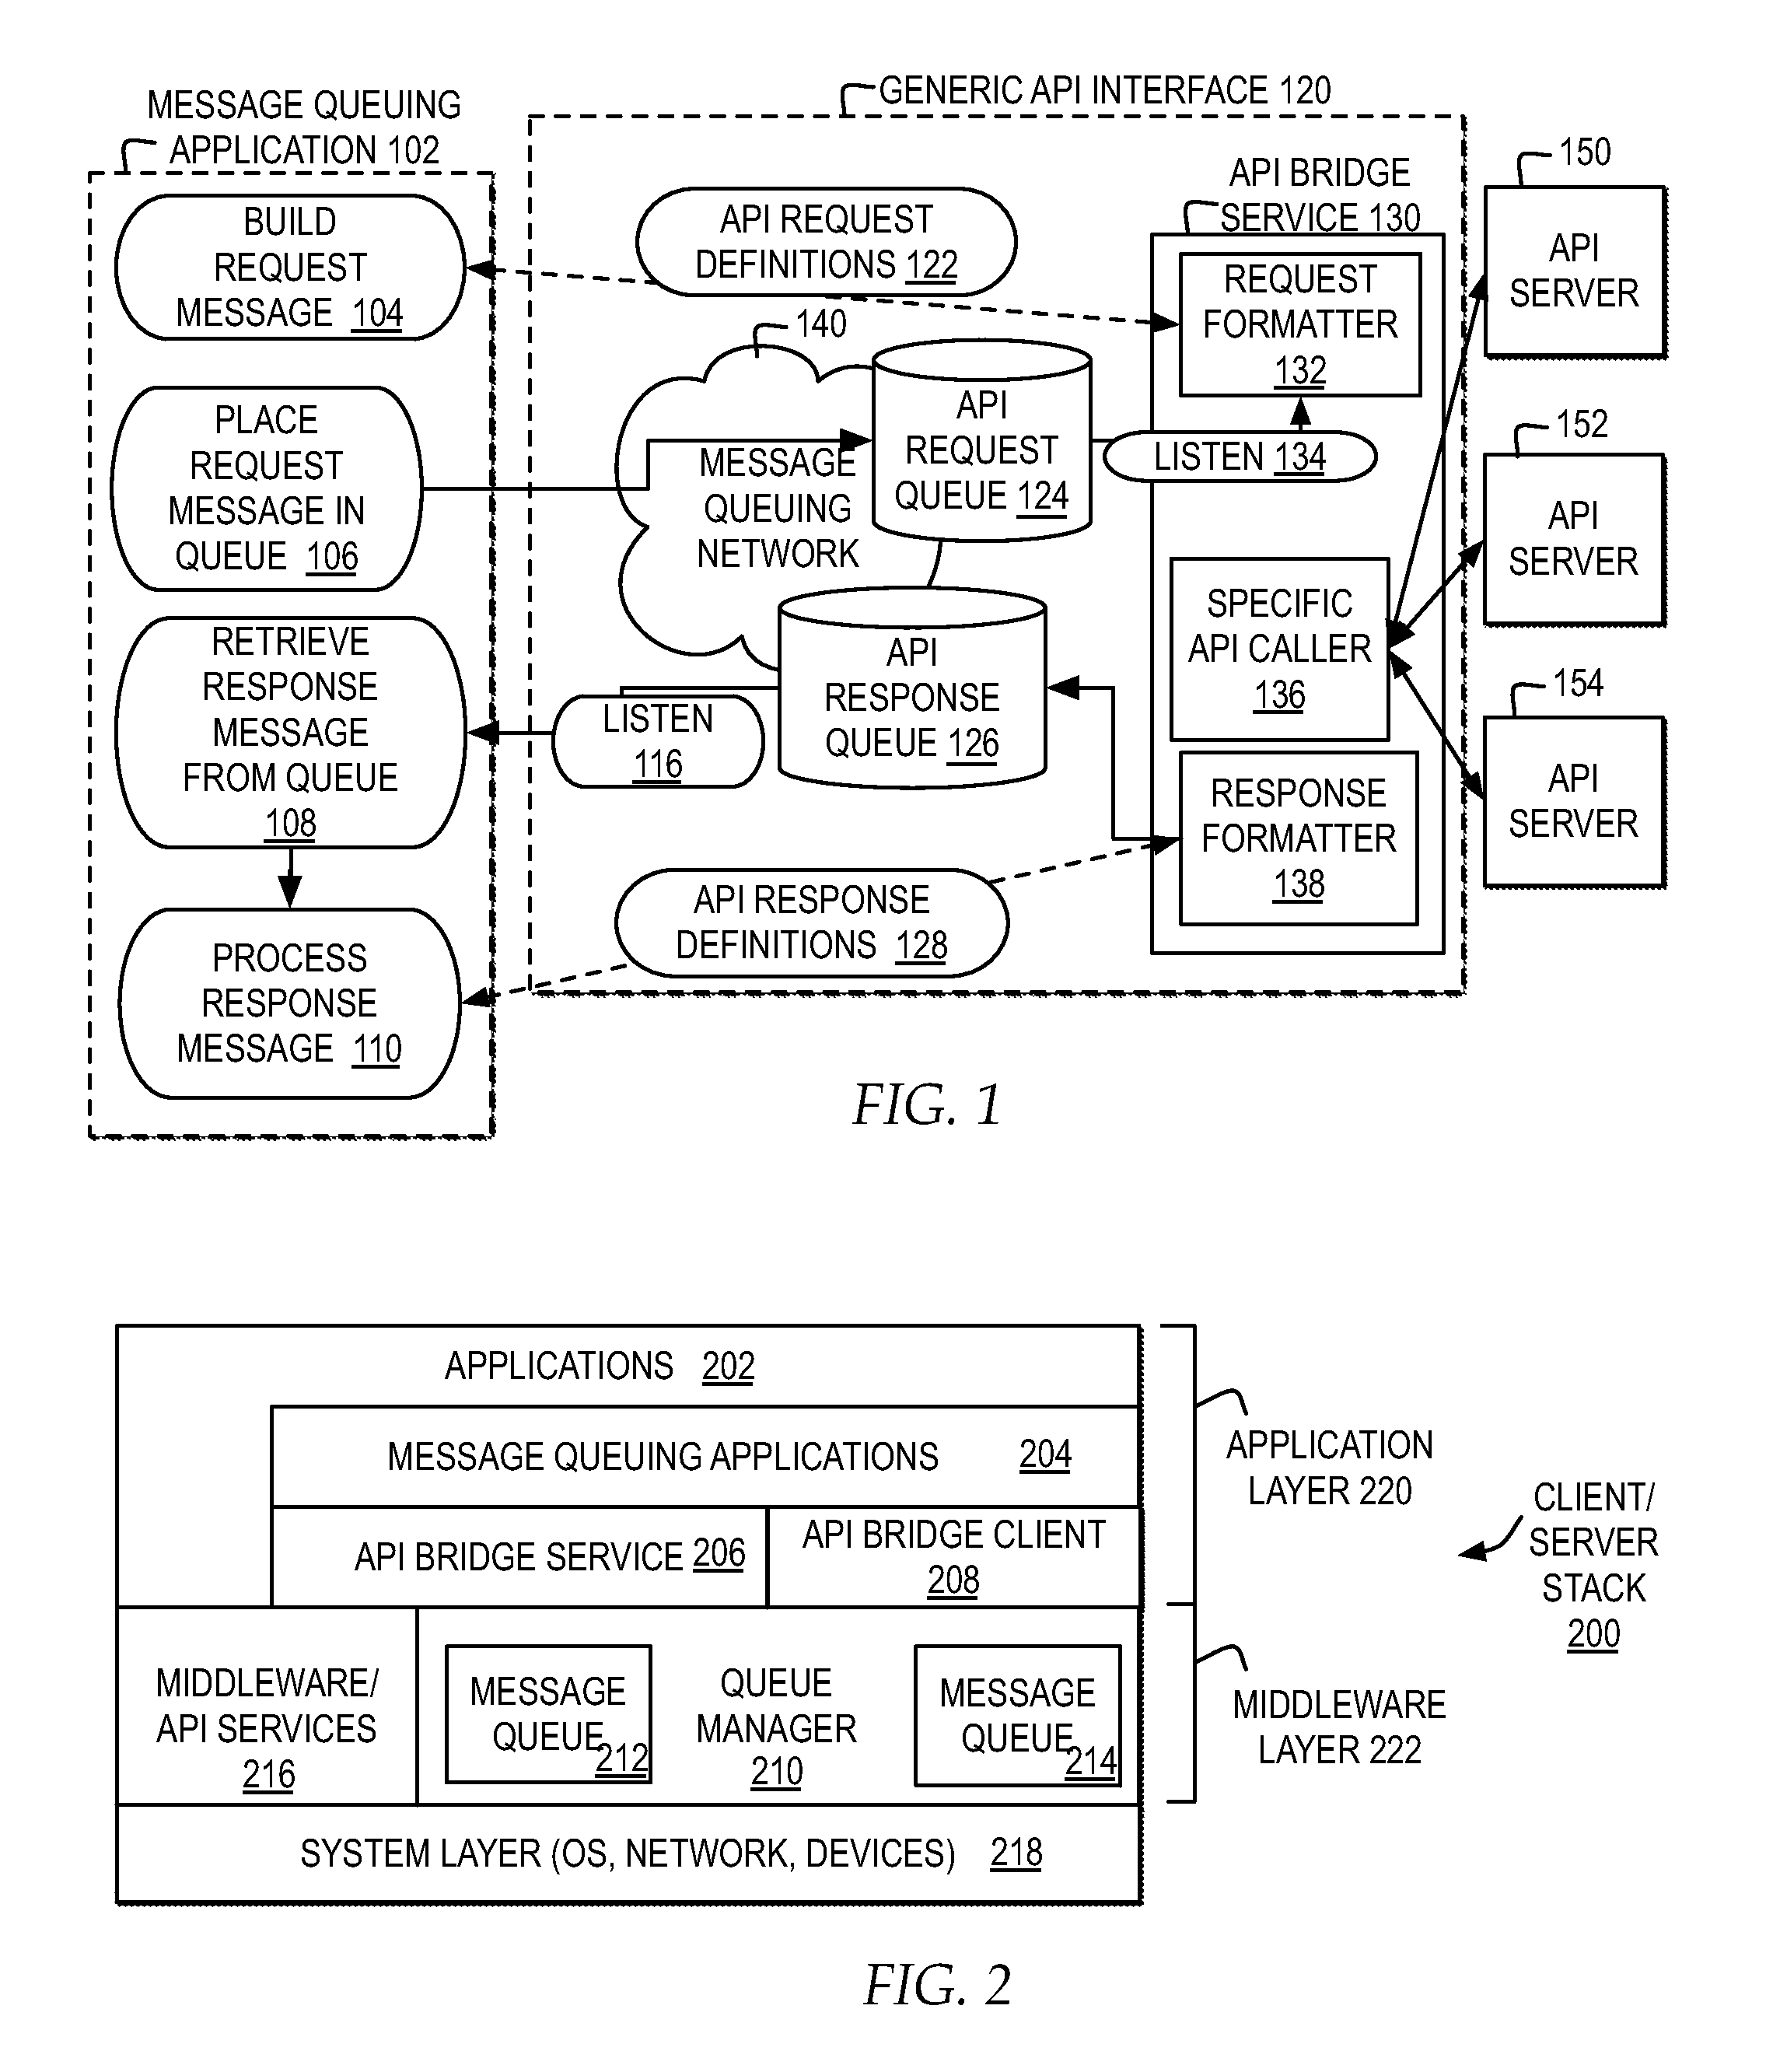 Message queuing application access to specific API services through a generic API interface integrating a message queue